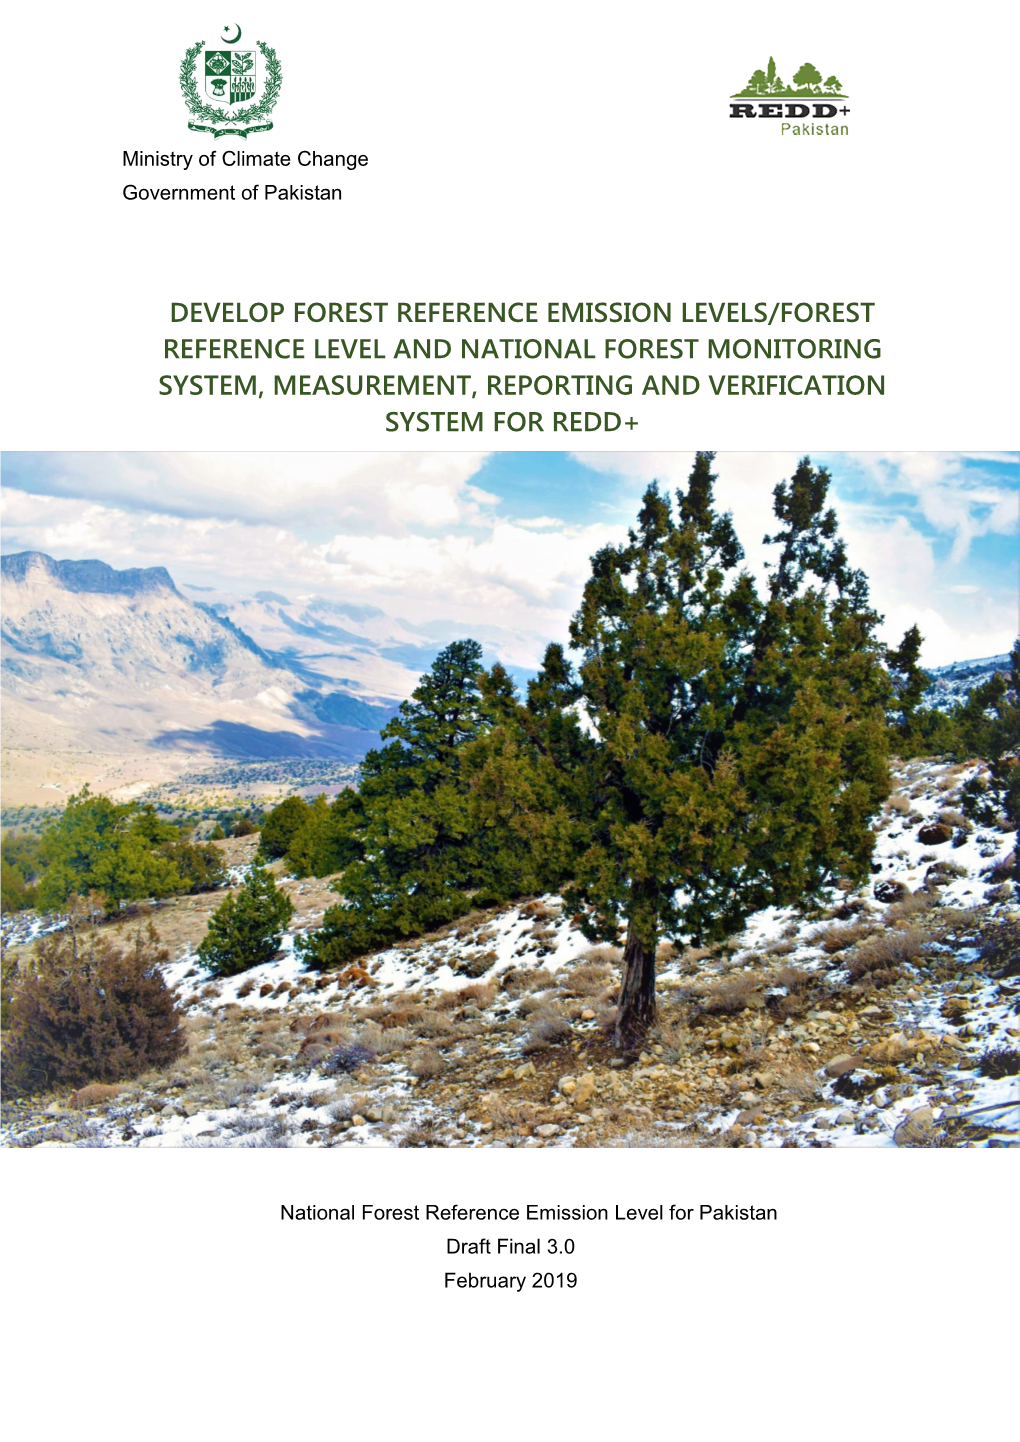 Develop Forest Reference Emission Levels/Forest Reference Level and National Forest Monitoring System, Measurement, Reporting and Verification System for Redd++